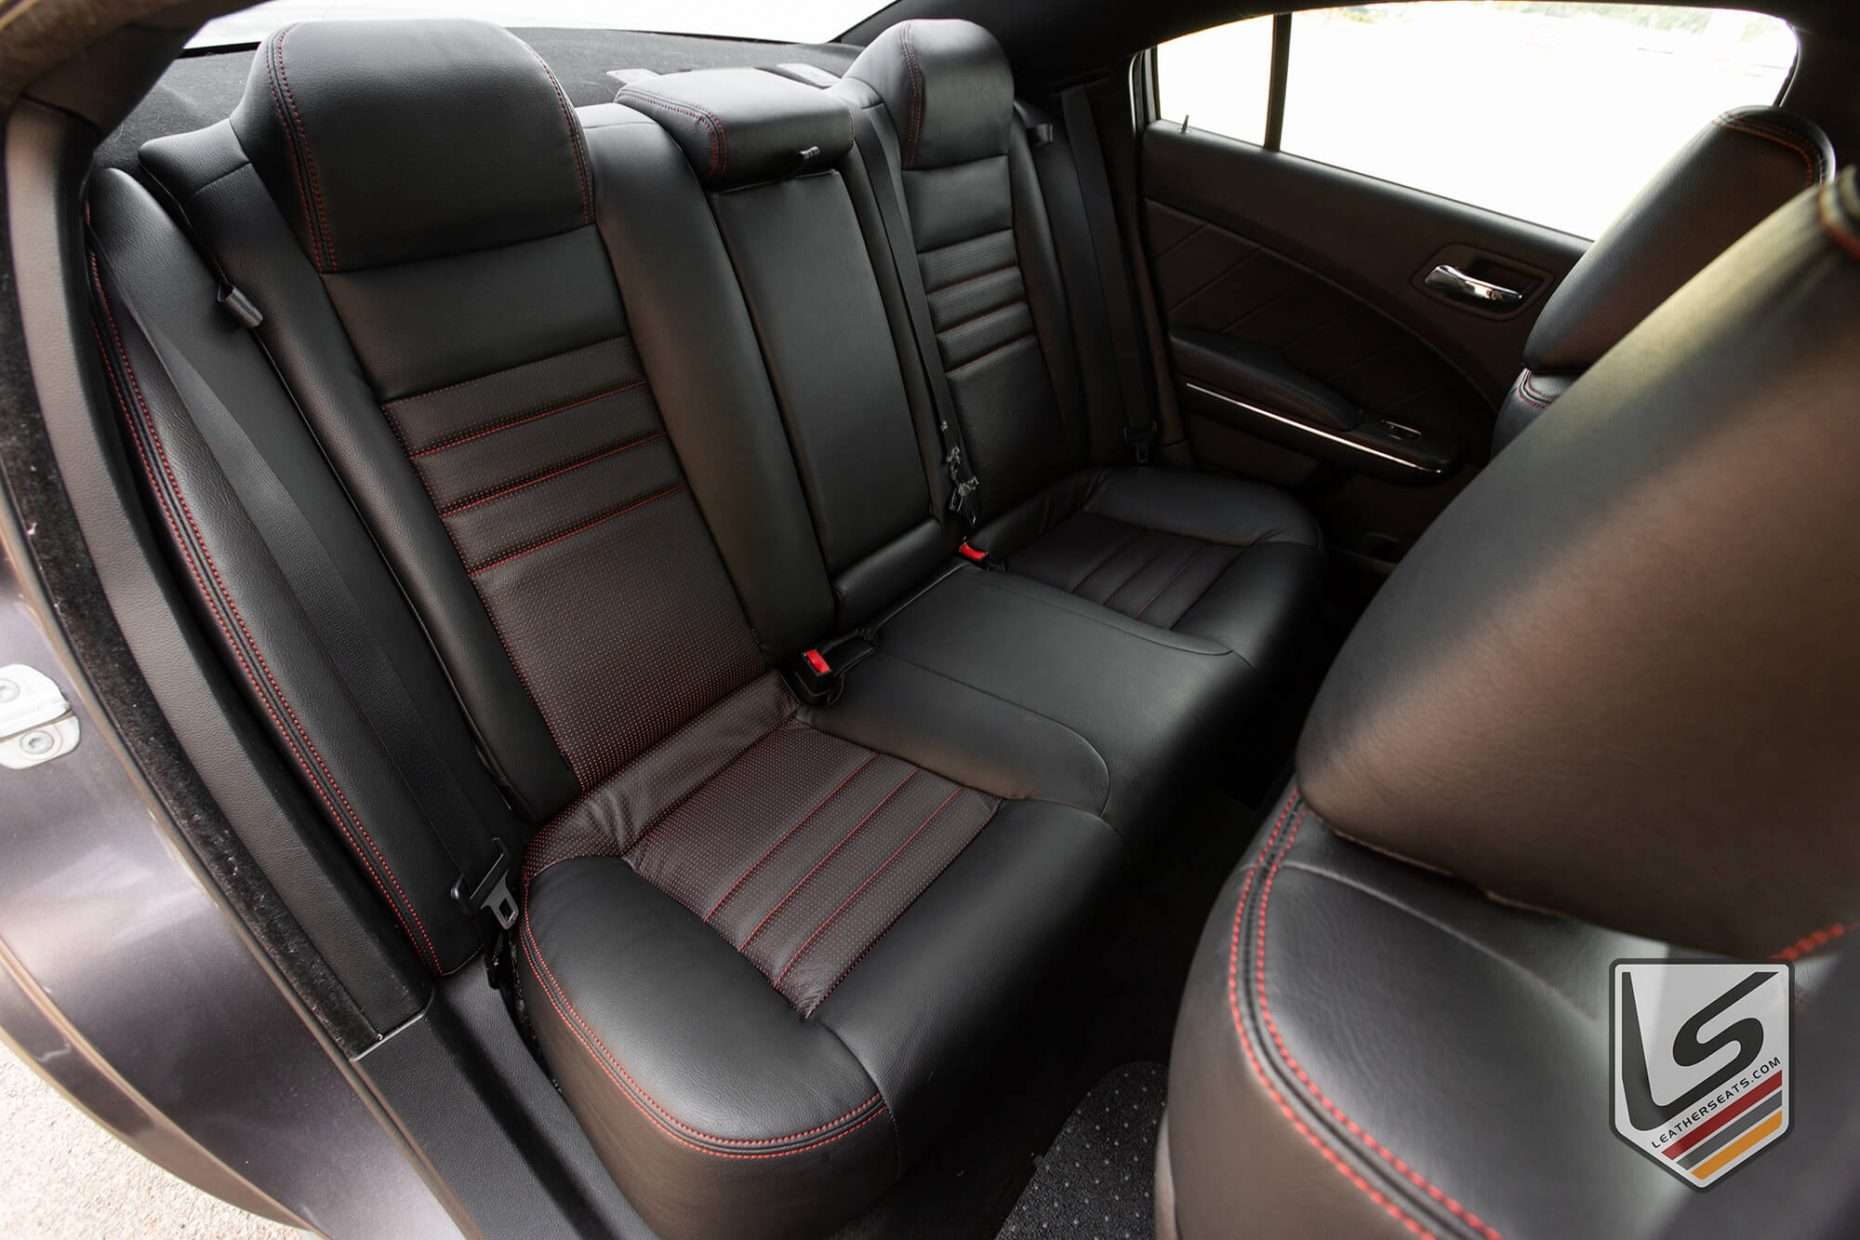 Custom Dodge Charger seats from leatherseats.com